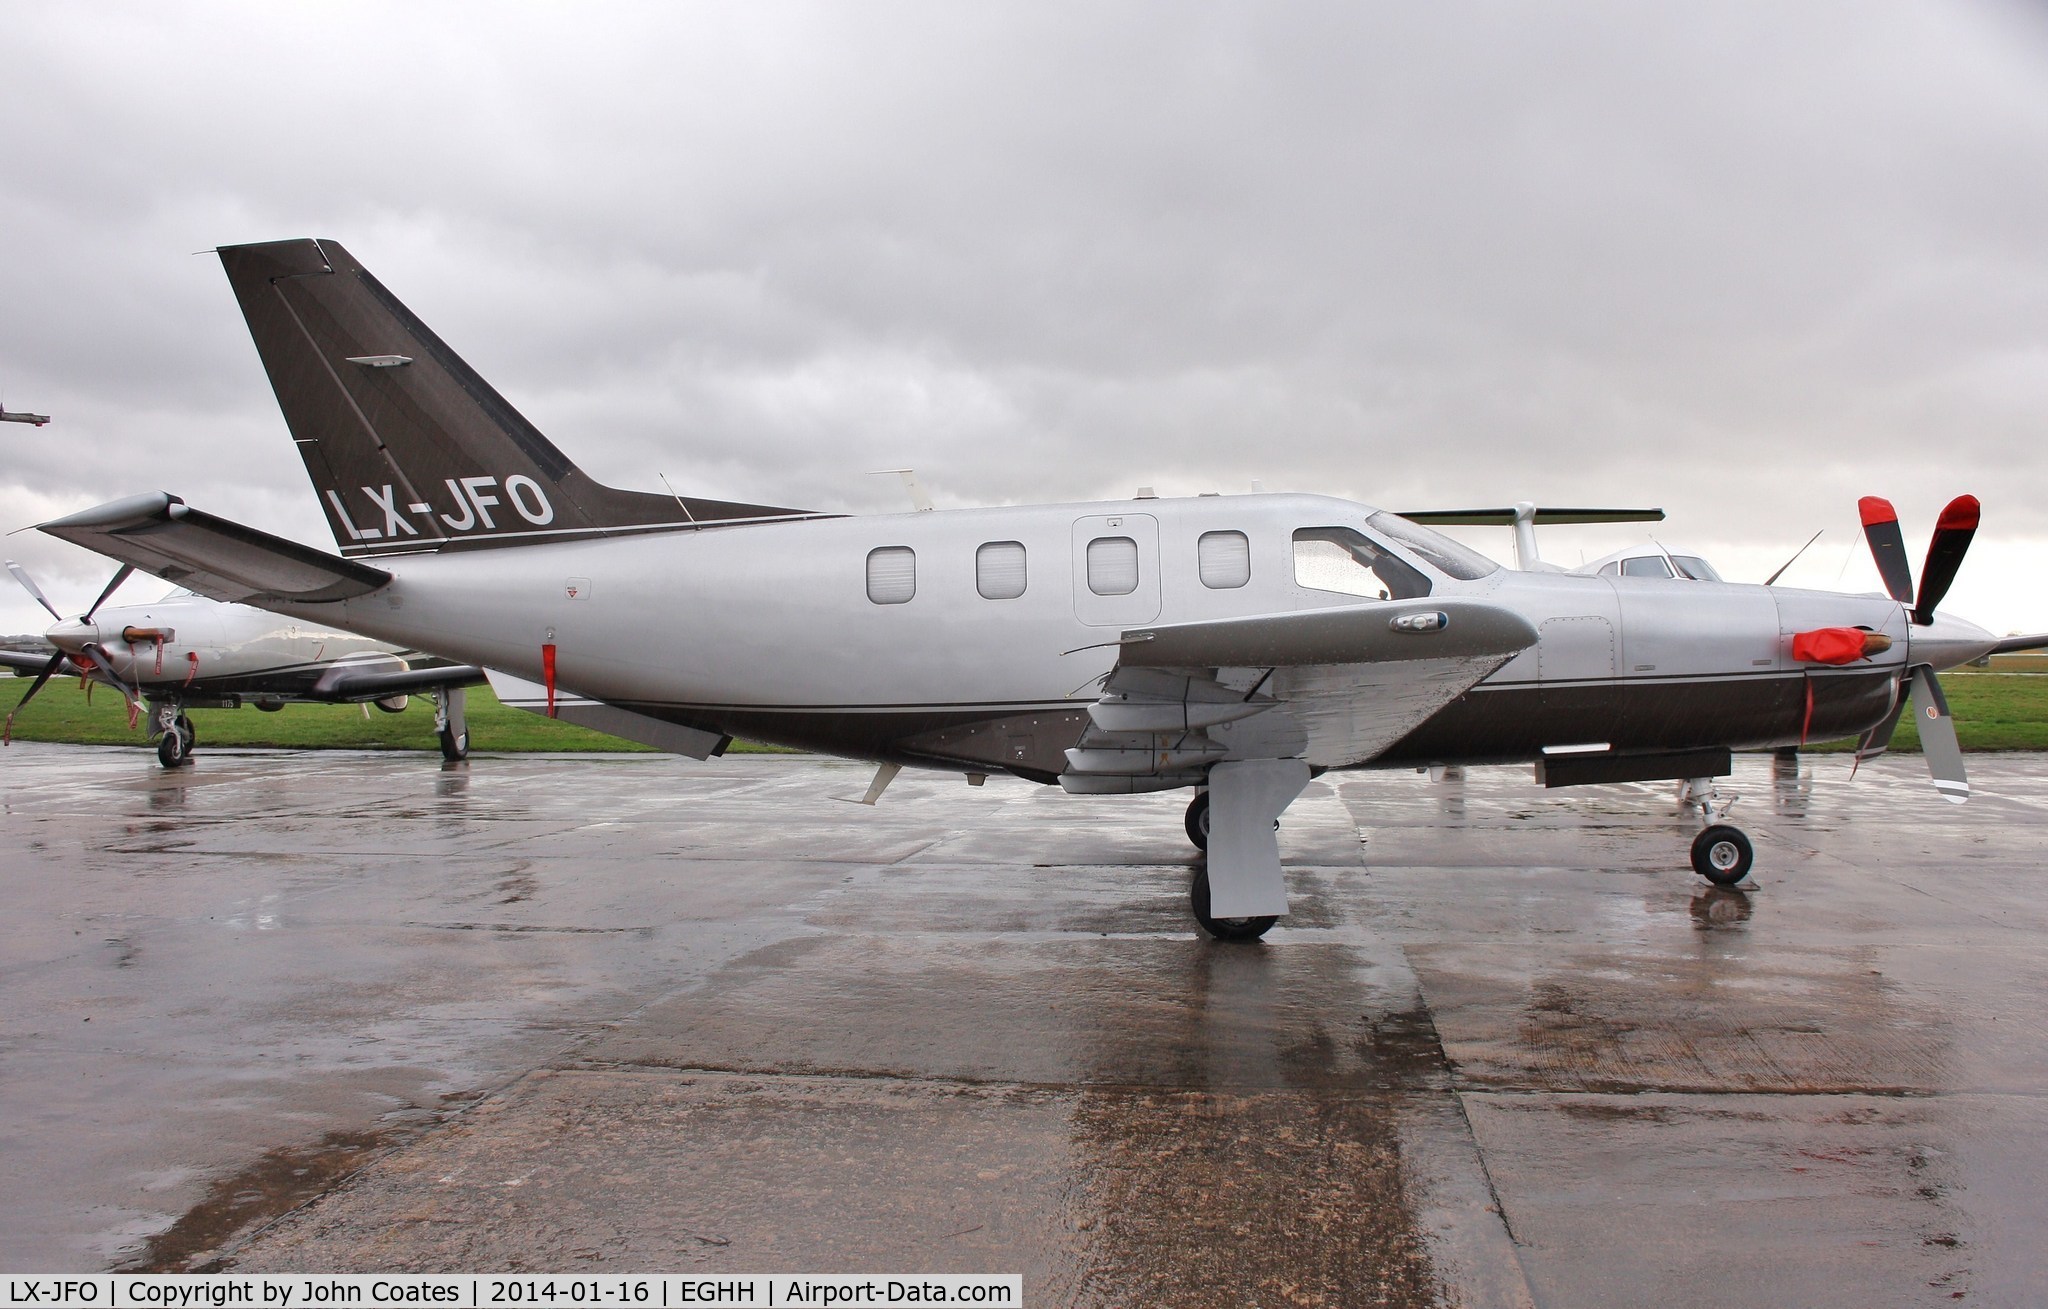 LX-JFO, 2007 Socata TBM-850 C/N 422, Parked in rain after overnight stay